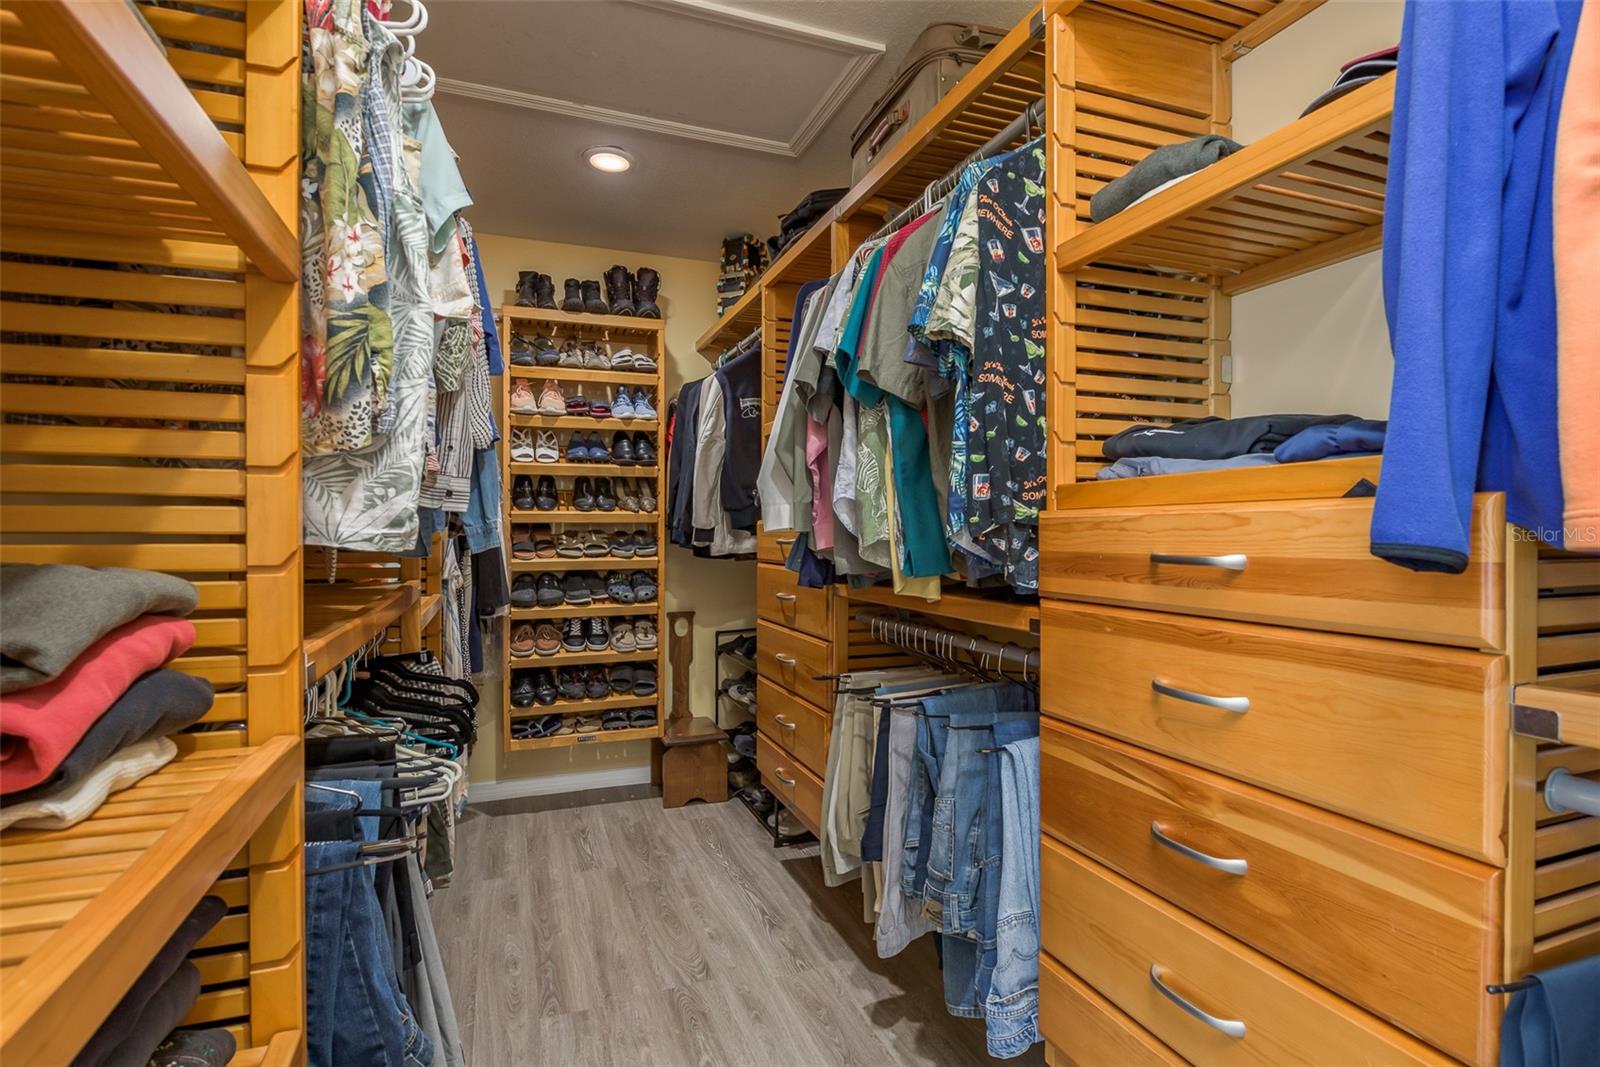 Primary walk-in closet with wood built-ins